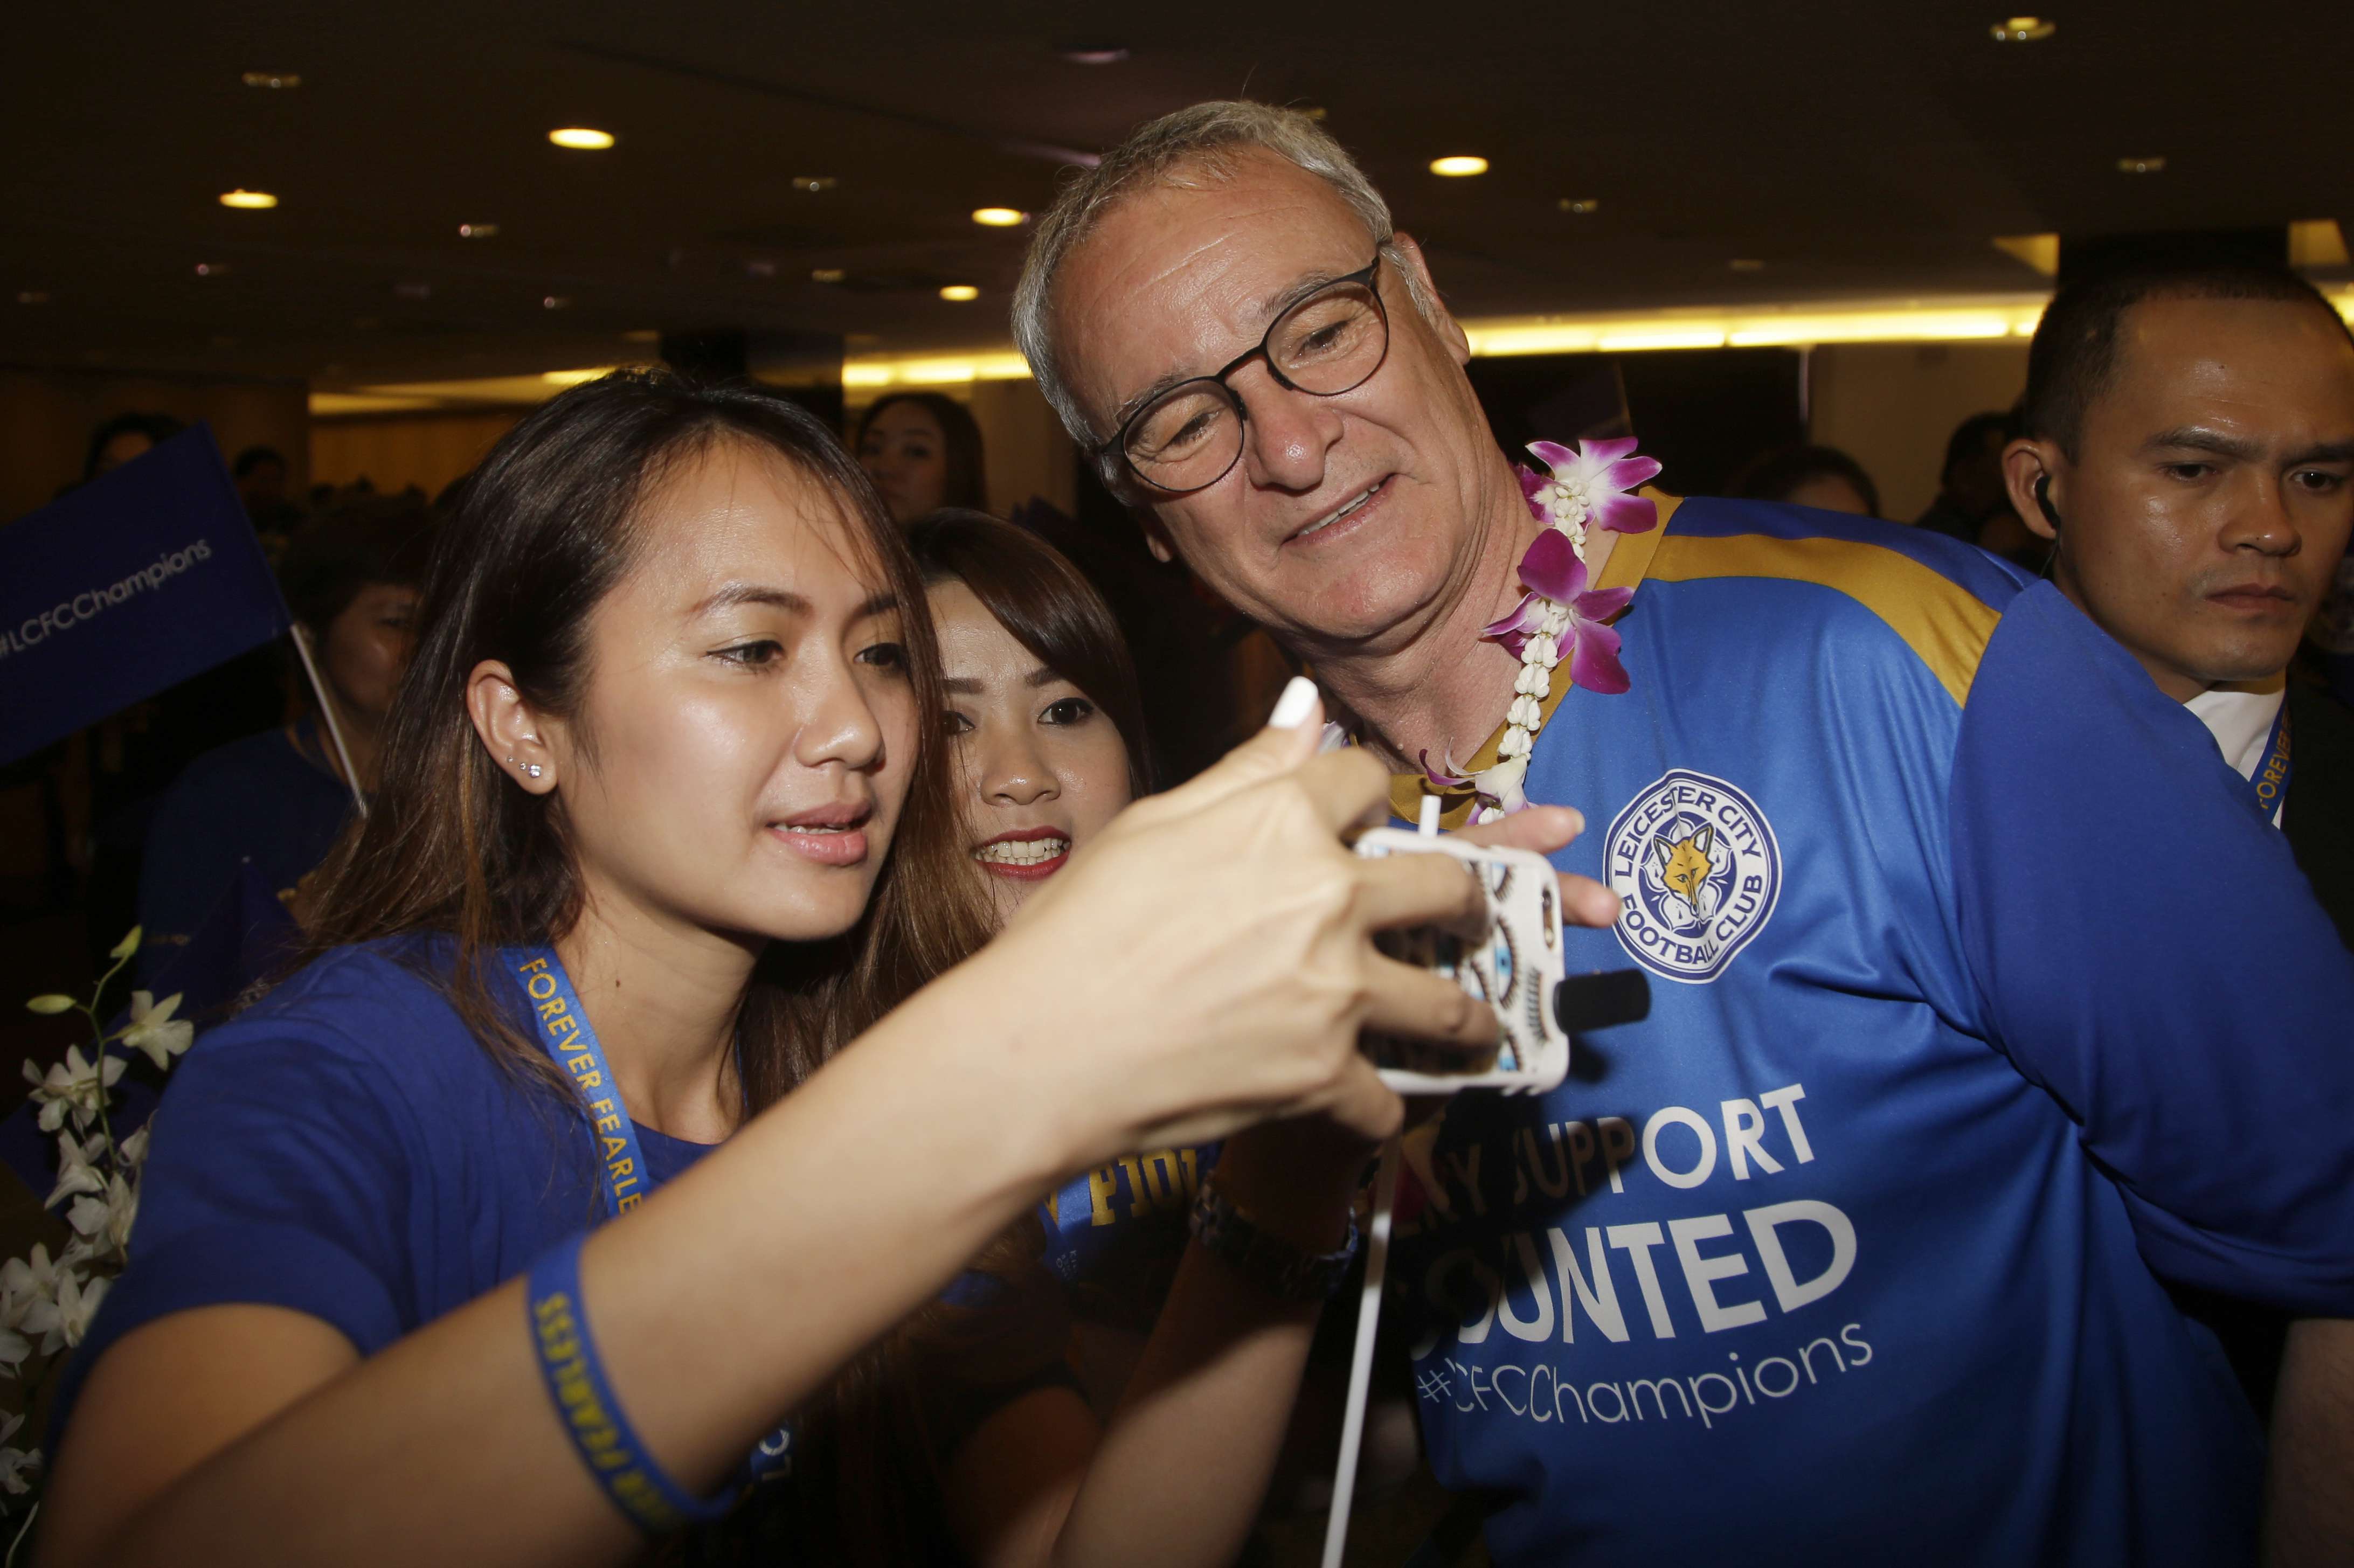 Who would not want a selfie with Leicester City manager Claudio Ranieri? A Thai soccer fan gets a priceless memento as the team arrived in Bangkok on Wednesday. Photo: AP